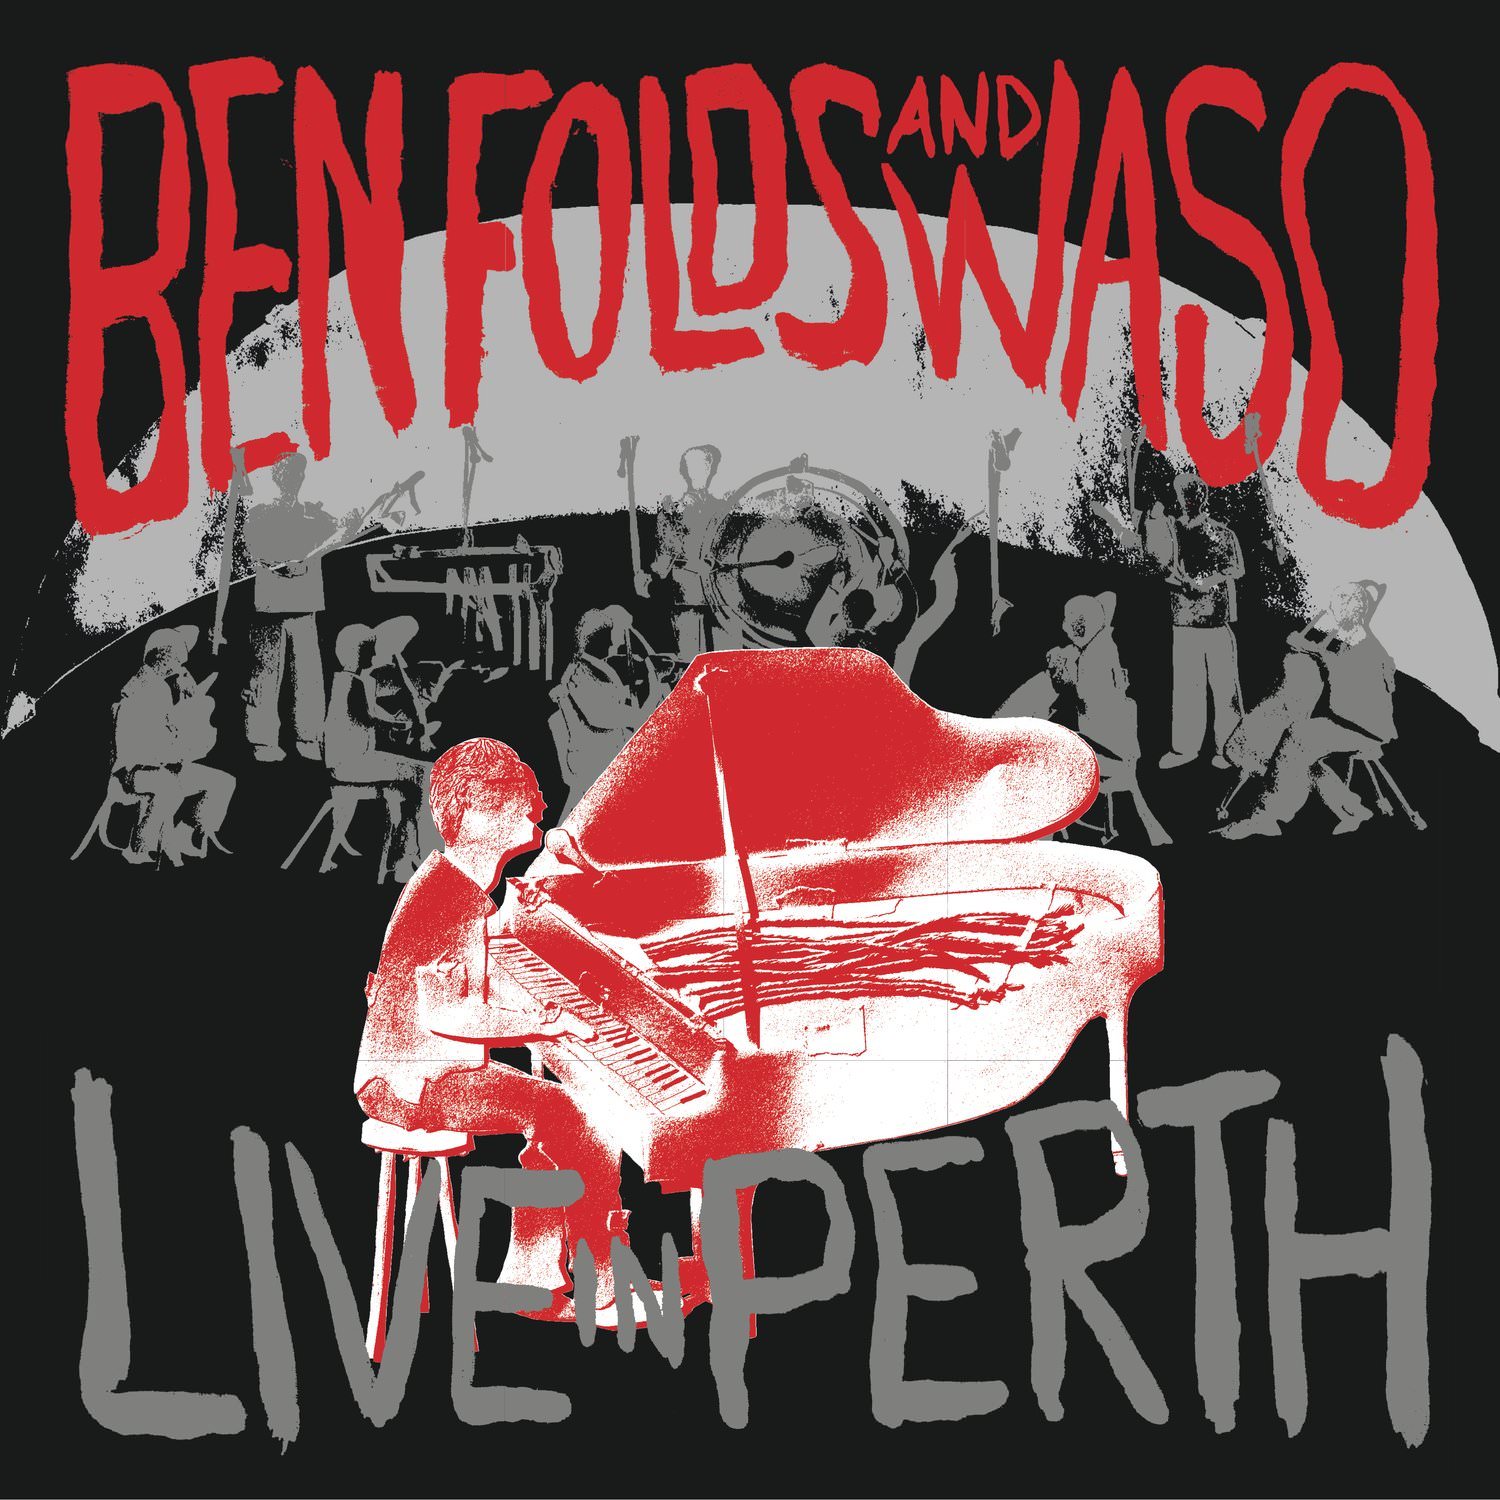 Ben Folds and WASO – Live In Perth (2017) [Qobuz FLAC 24bit/48kHz]